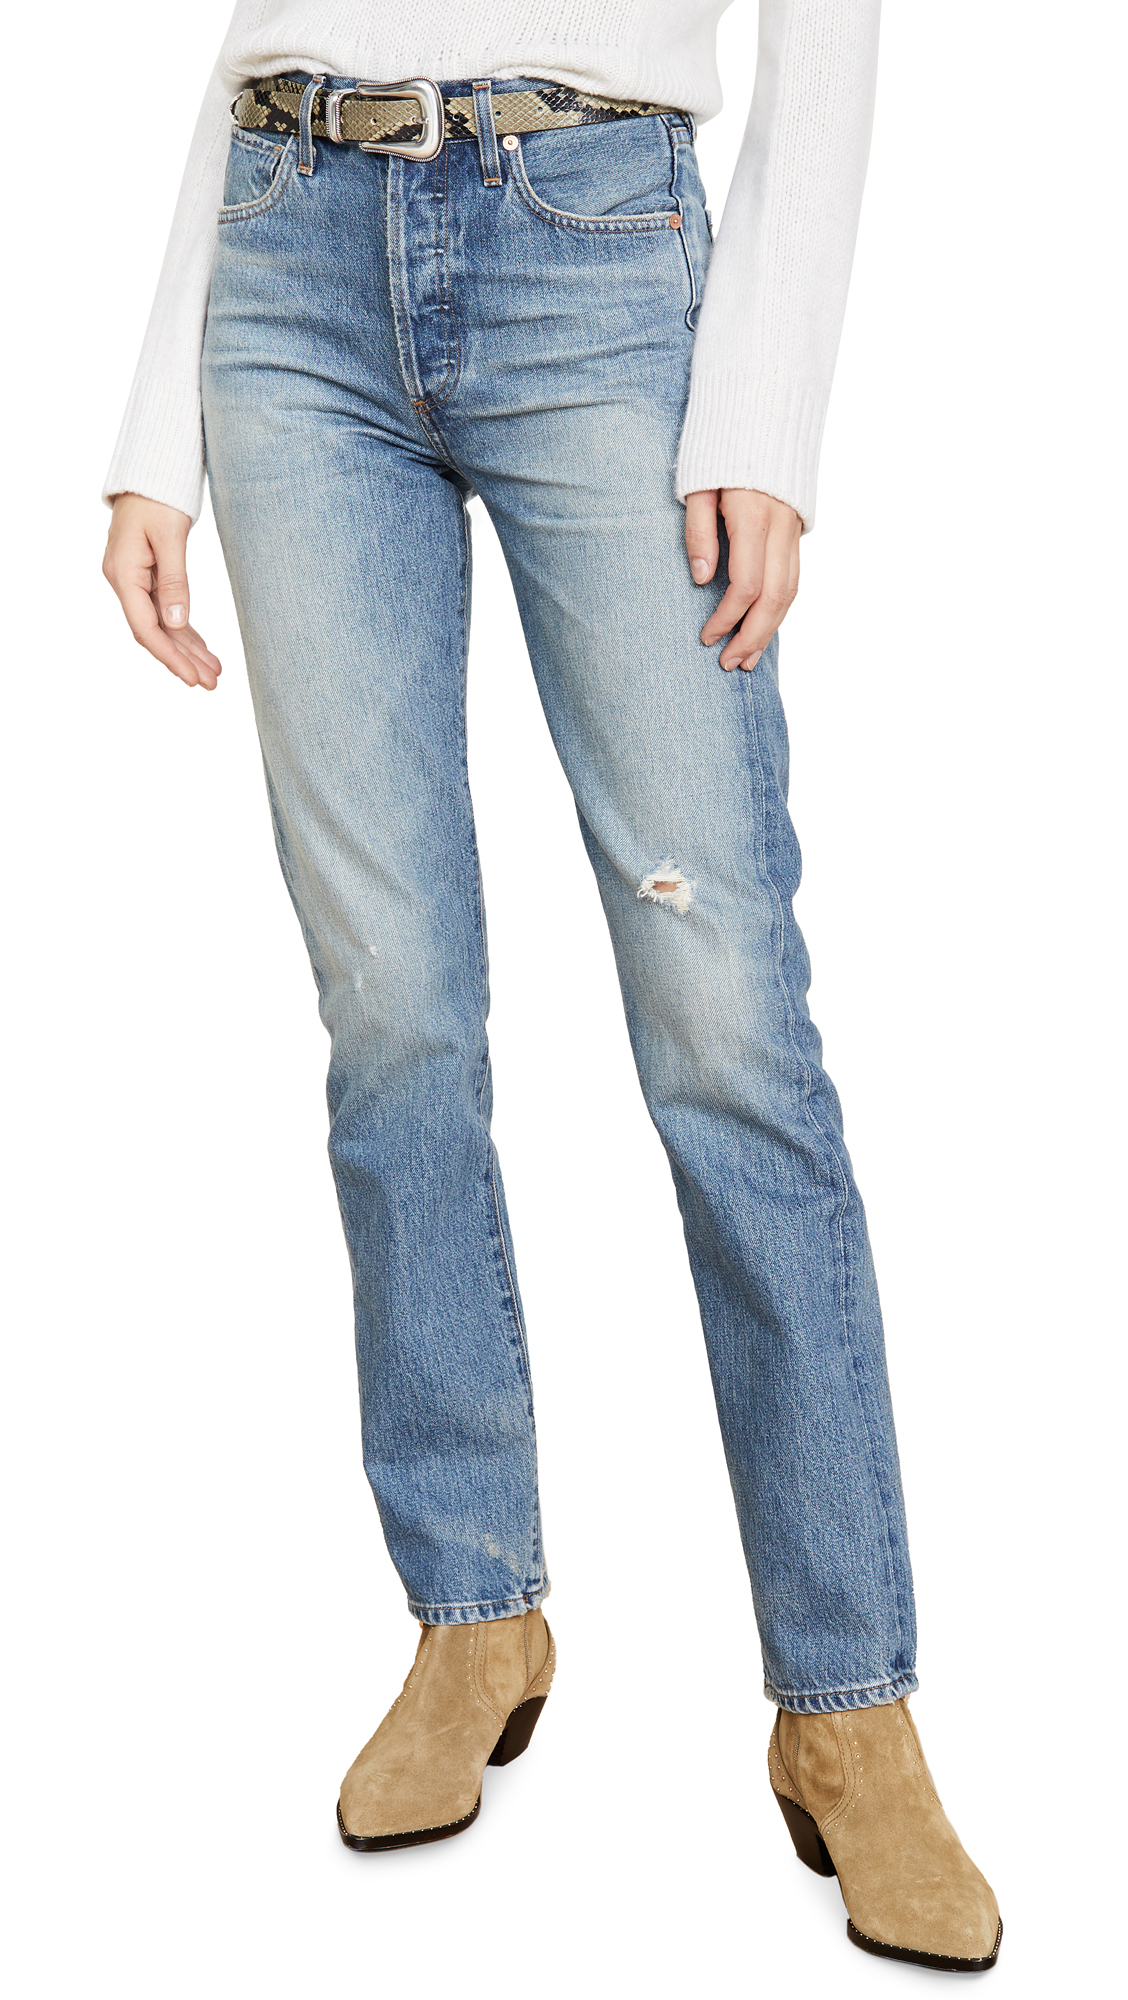 most trending jeans